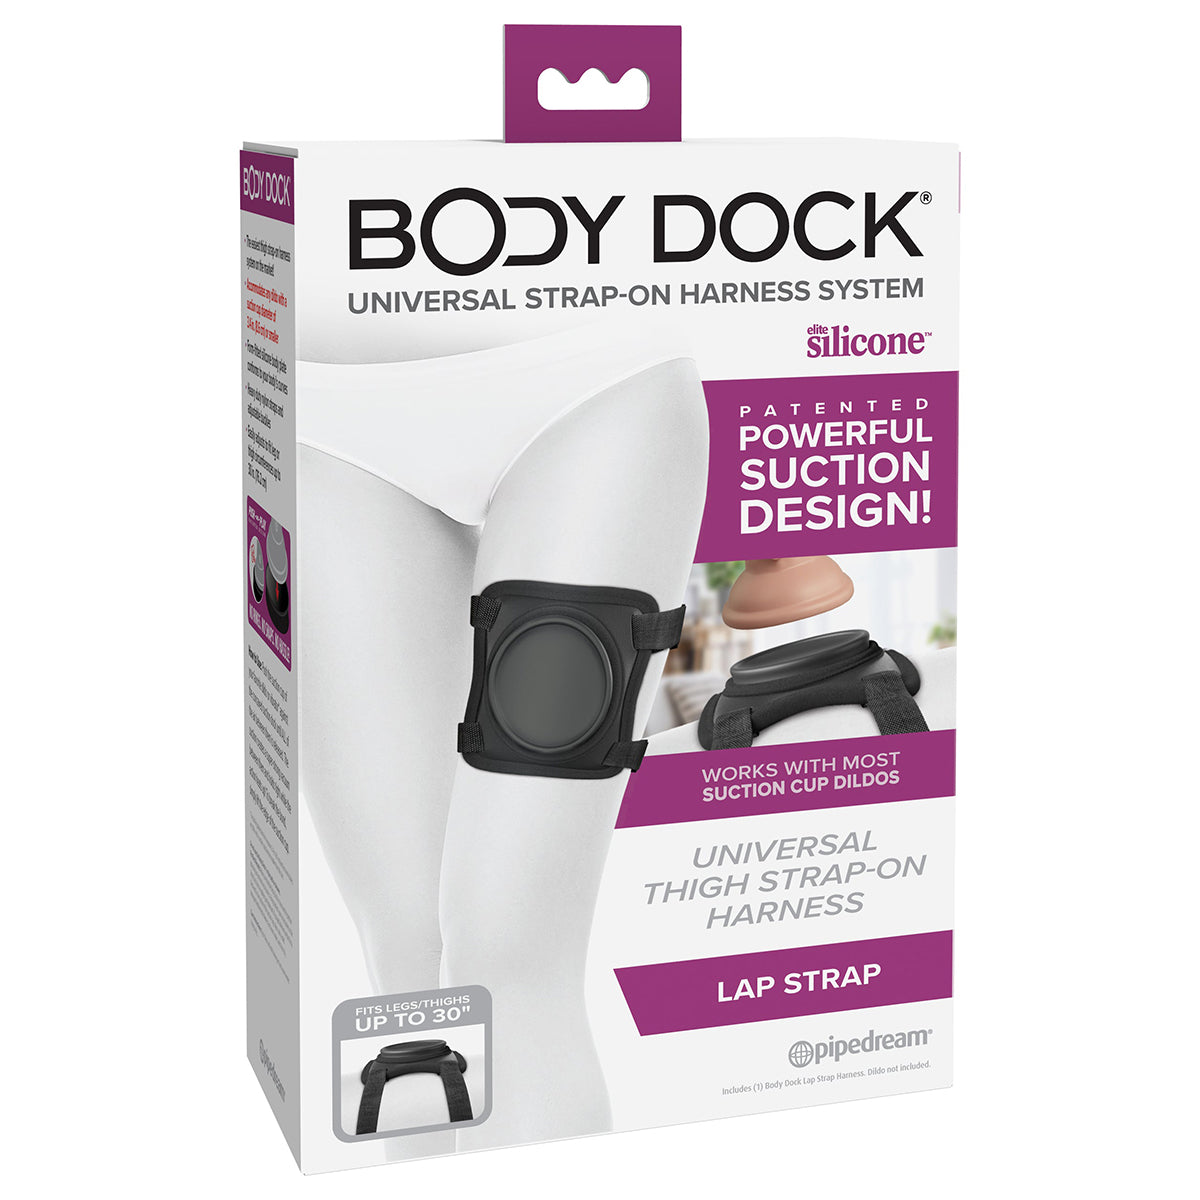 Body Dock Lap Strap - Thorn & Feather